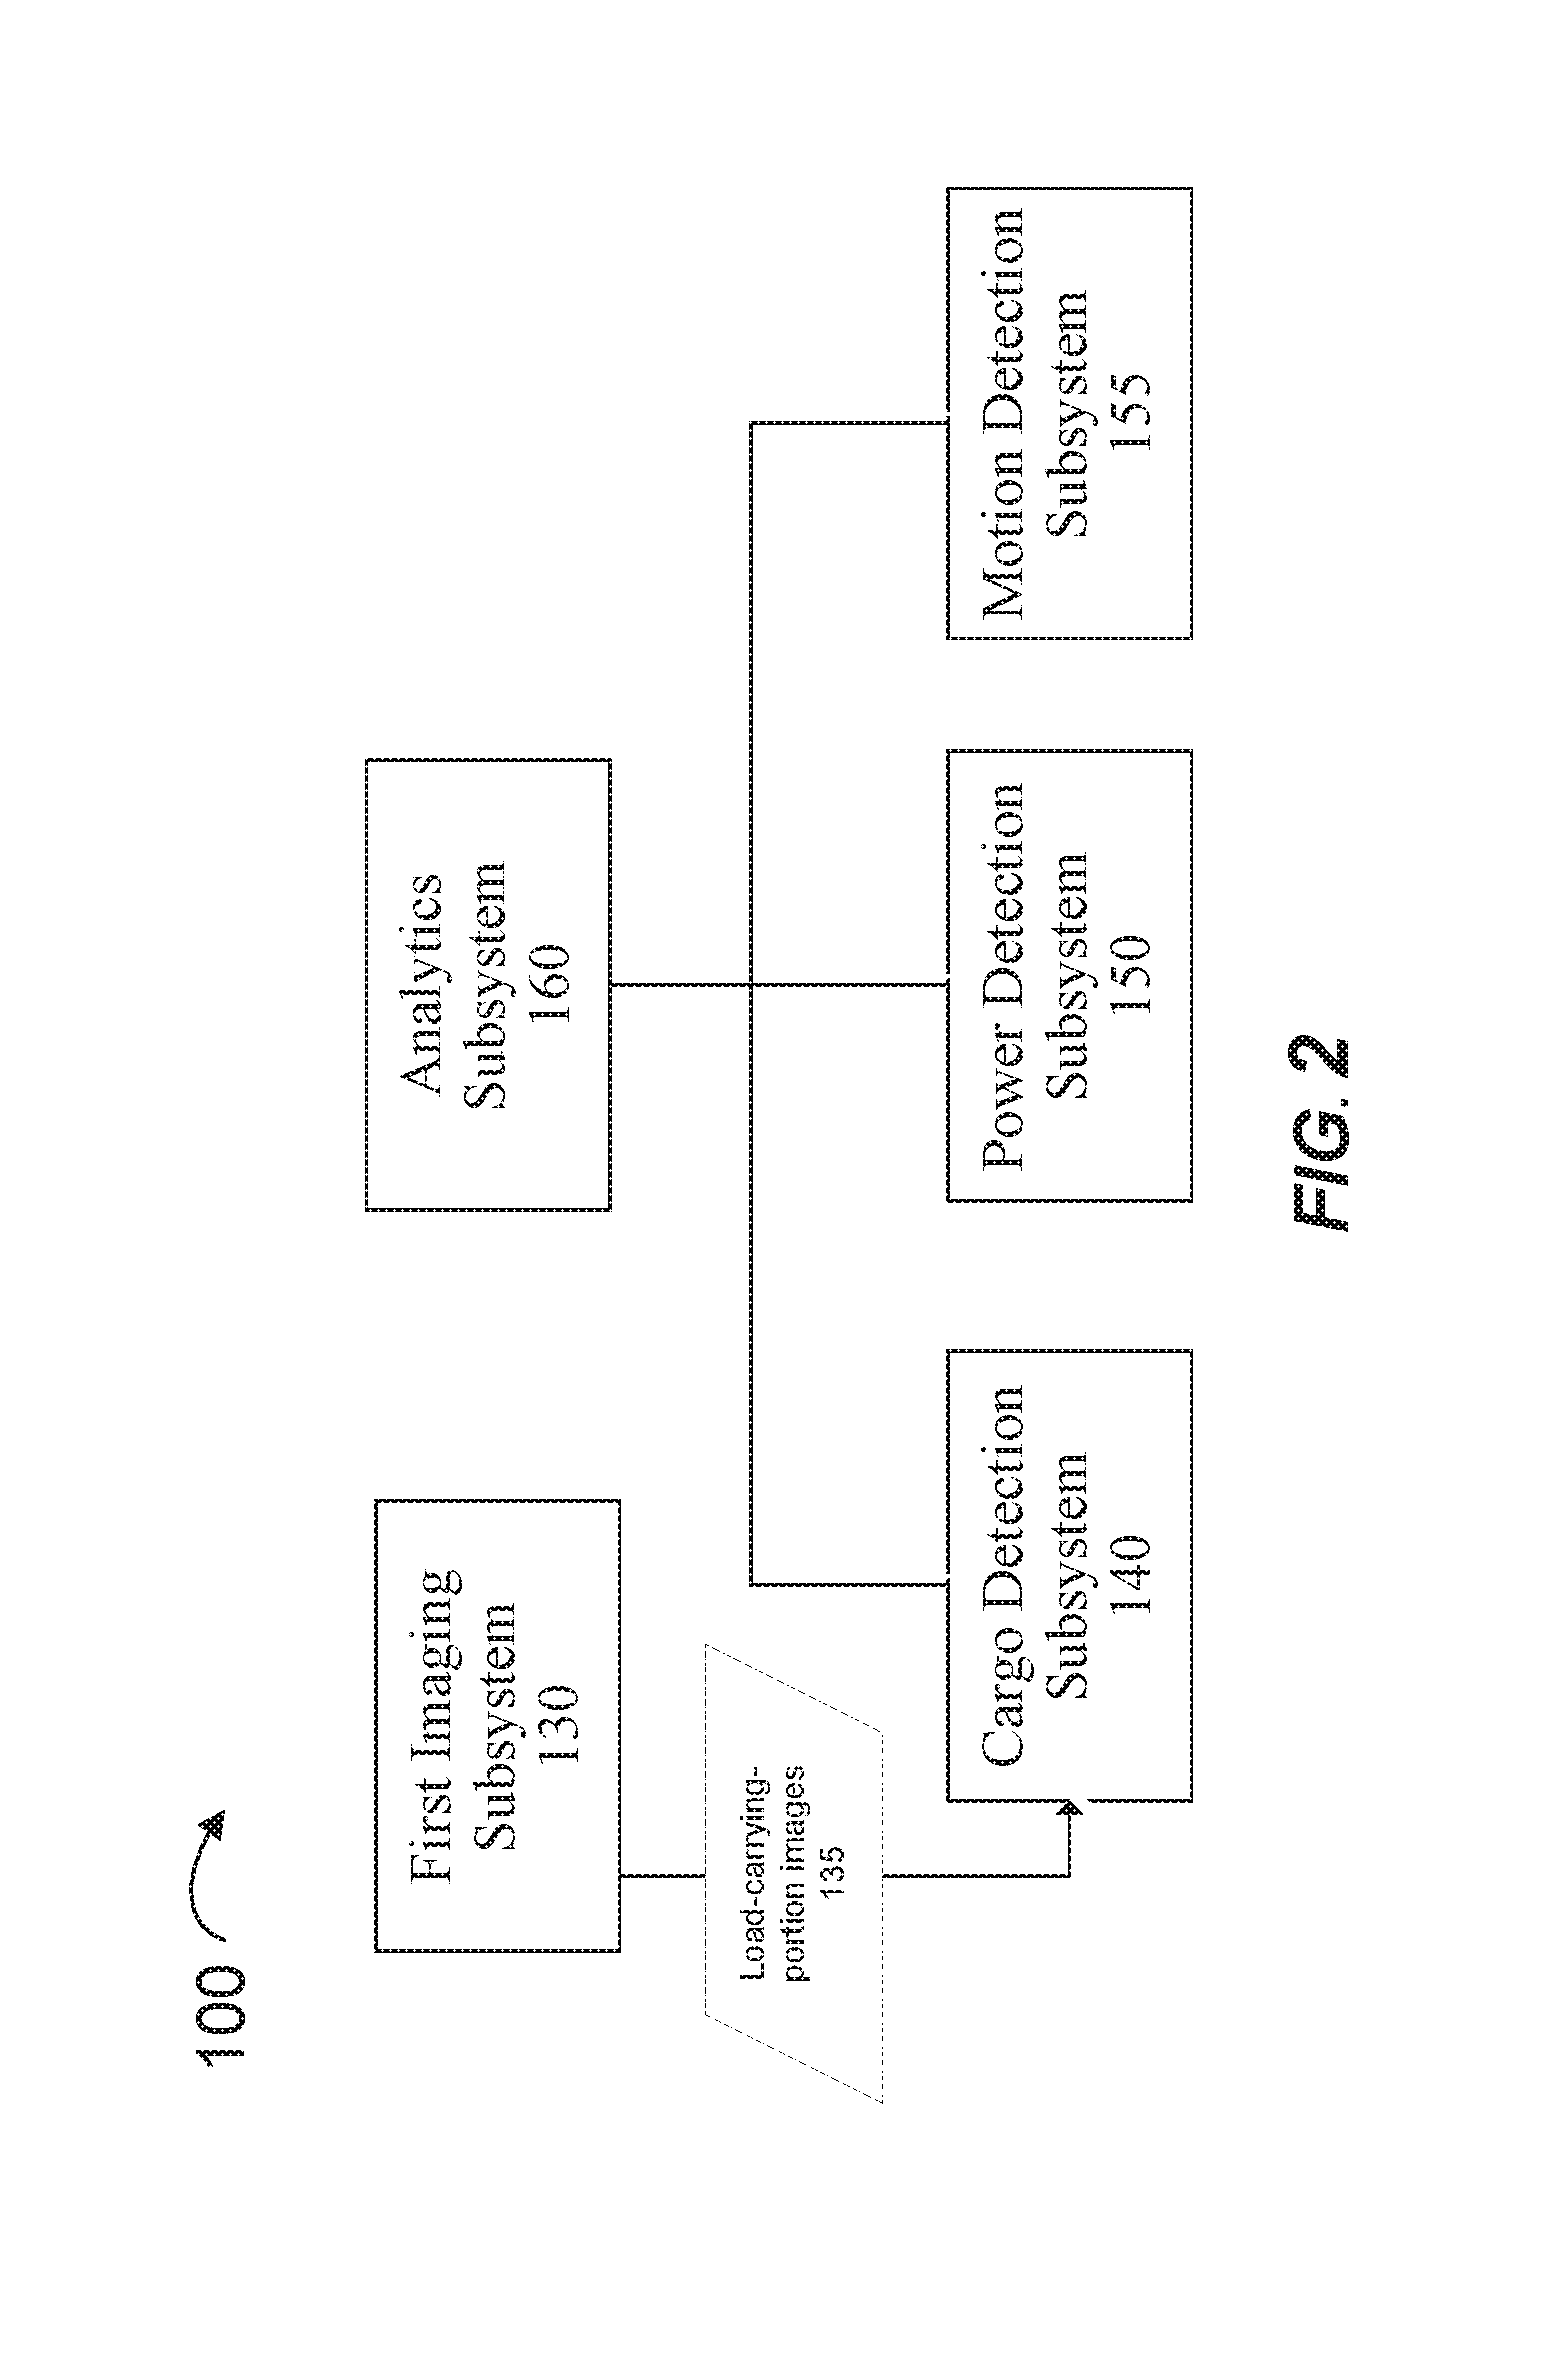 System and method for monitoring an industrial vehicle